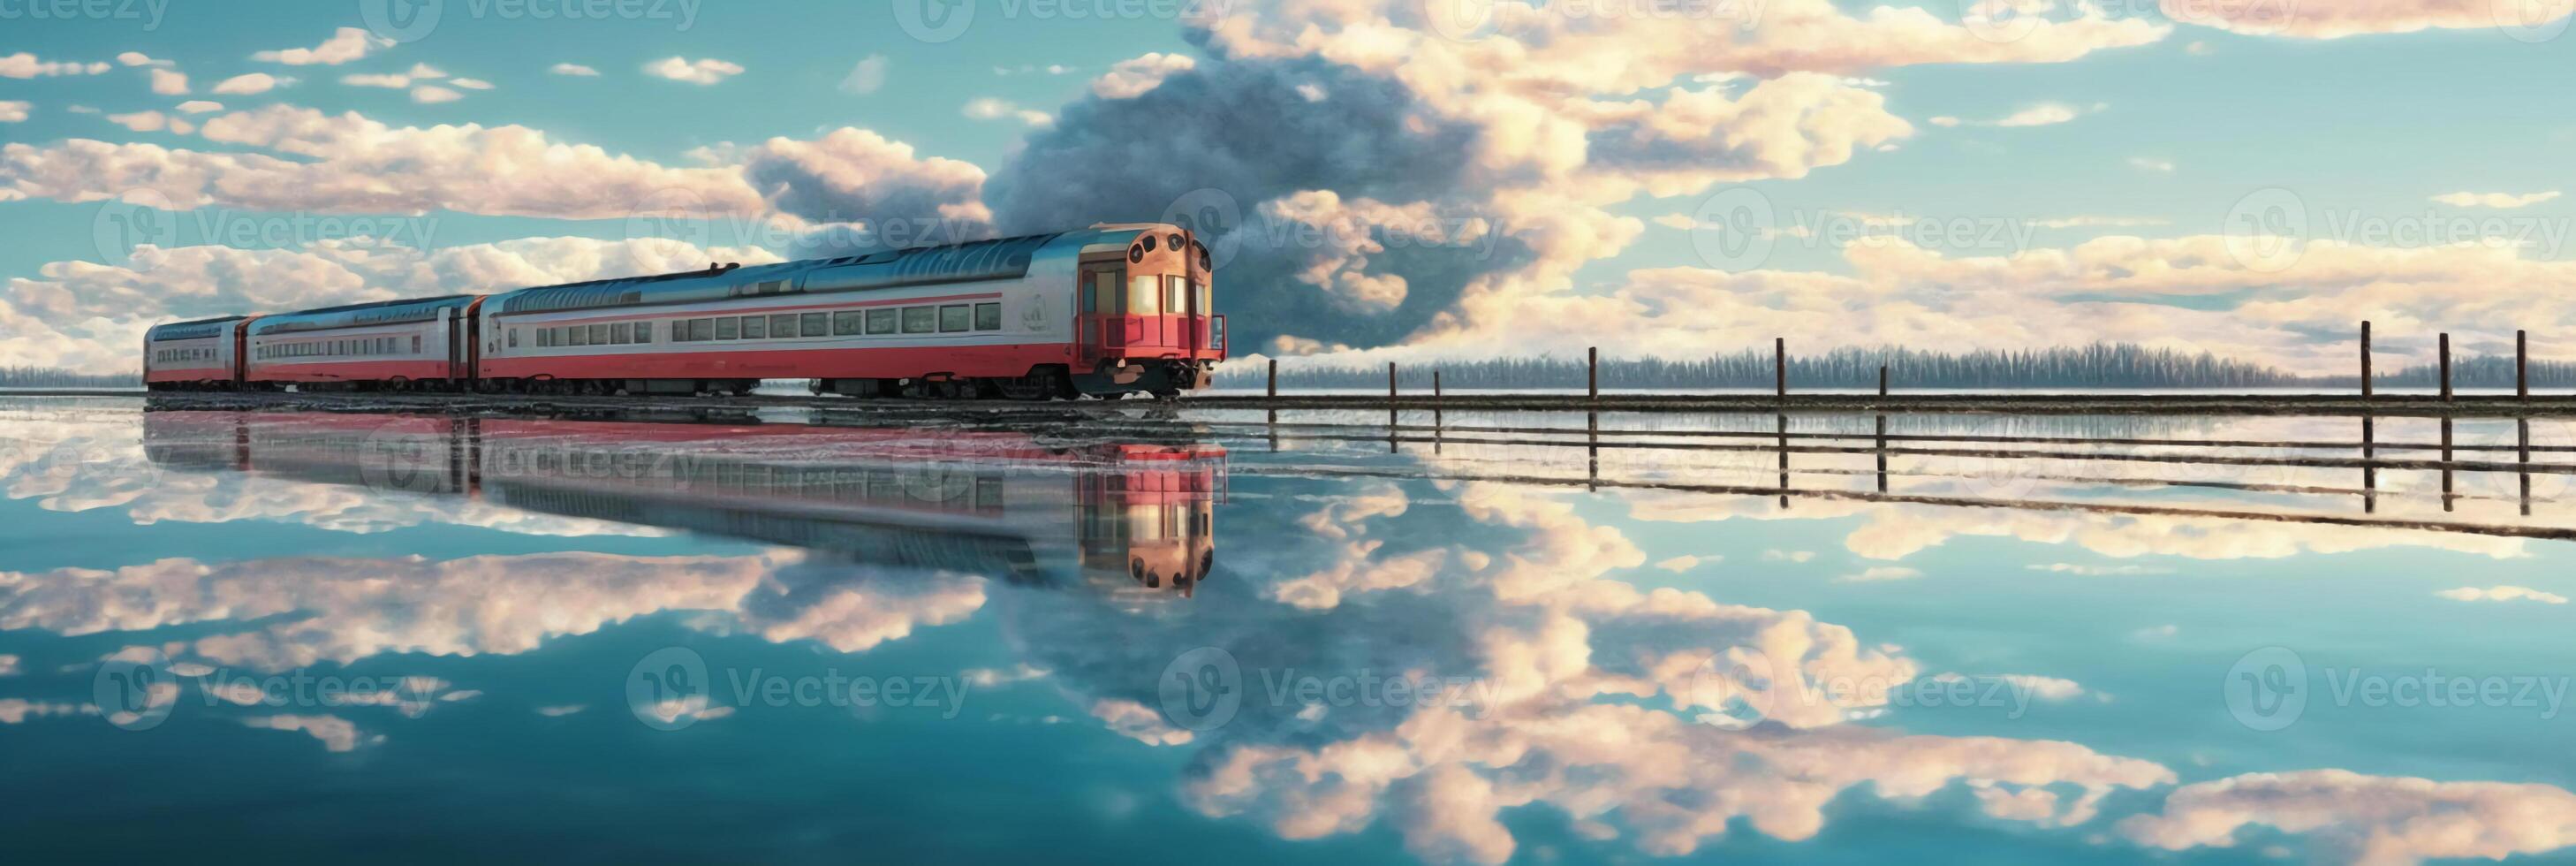 A train is traveling on lake, water surface reflects the sky. photo